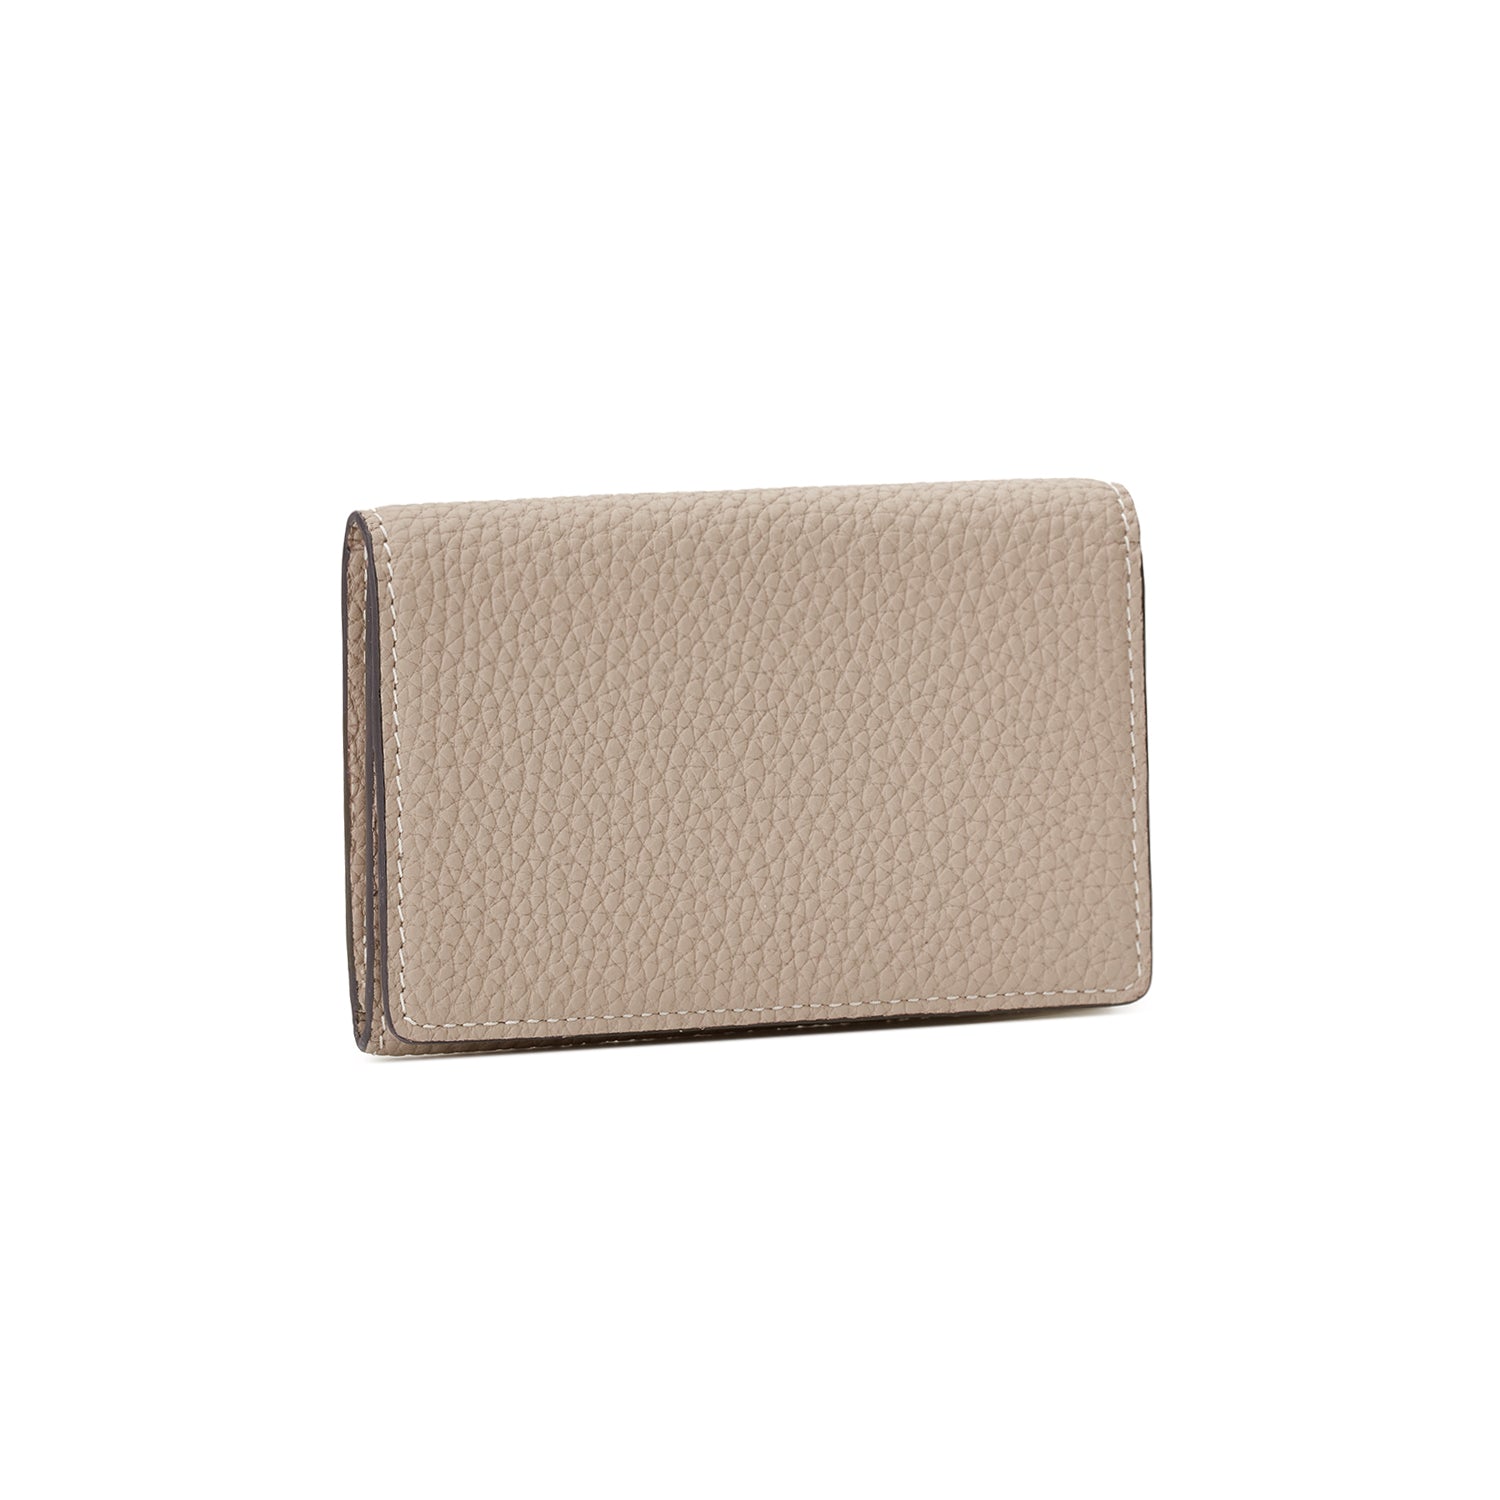 Business card case with sleeve in shrink leather